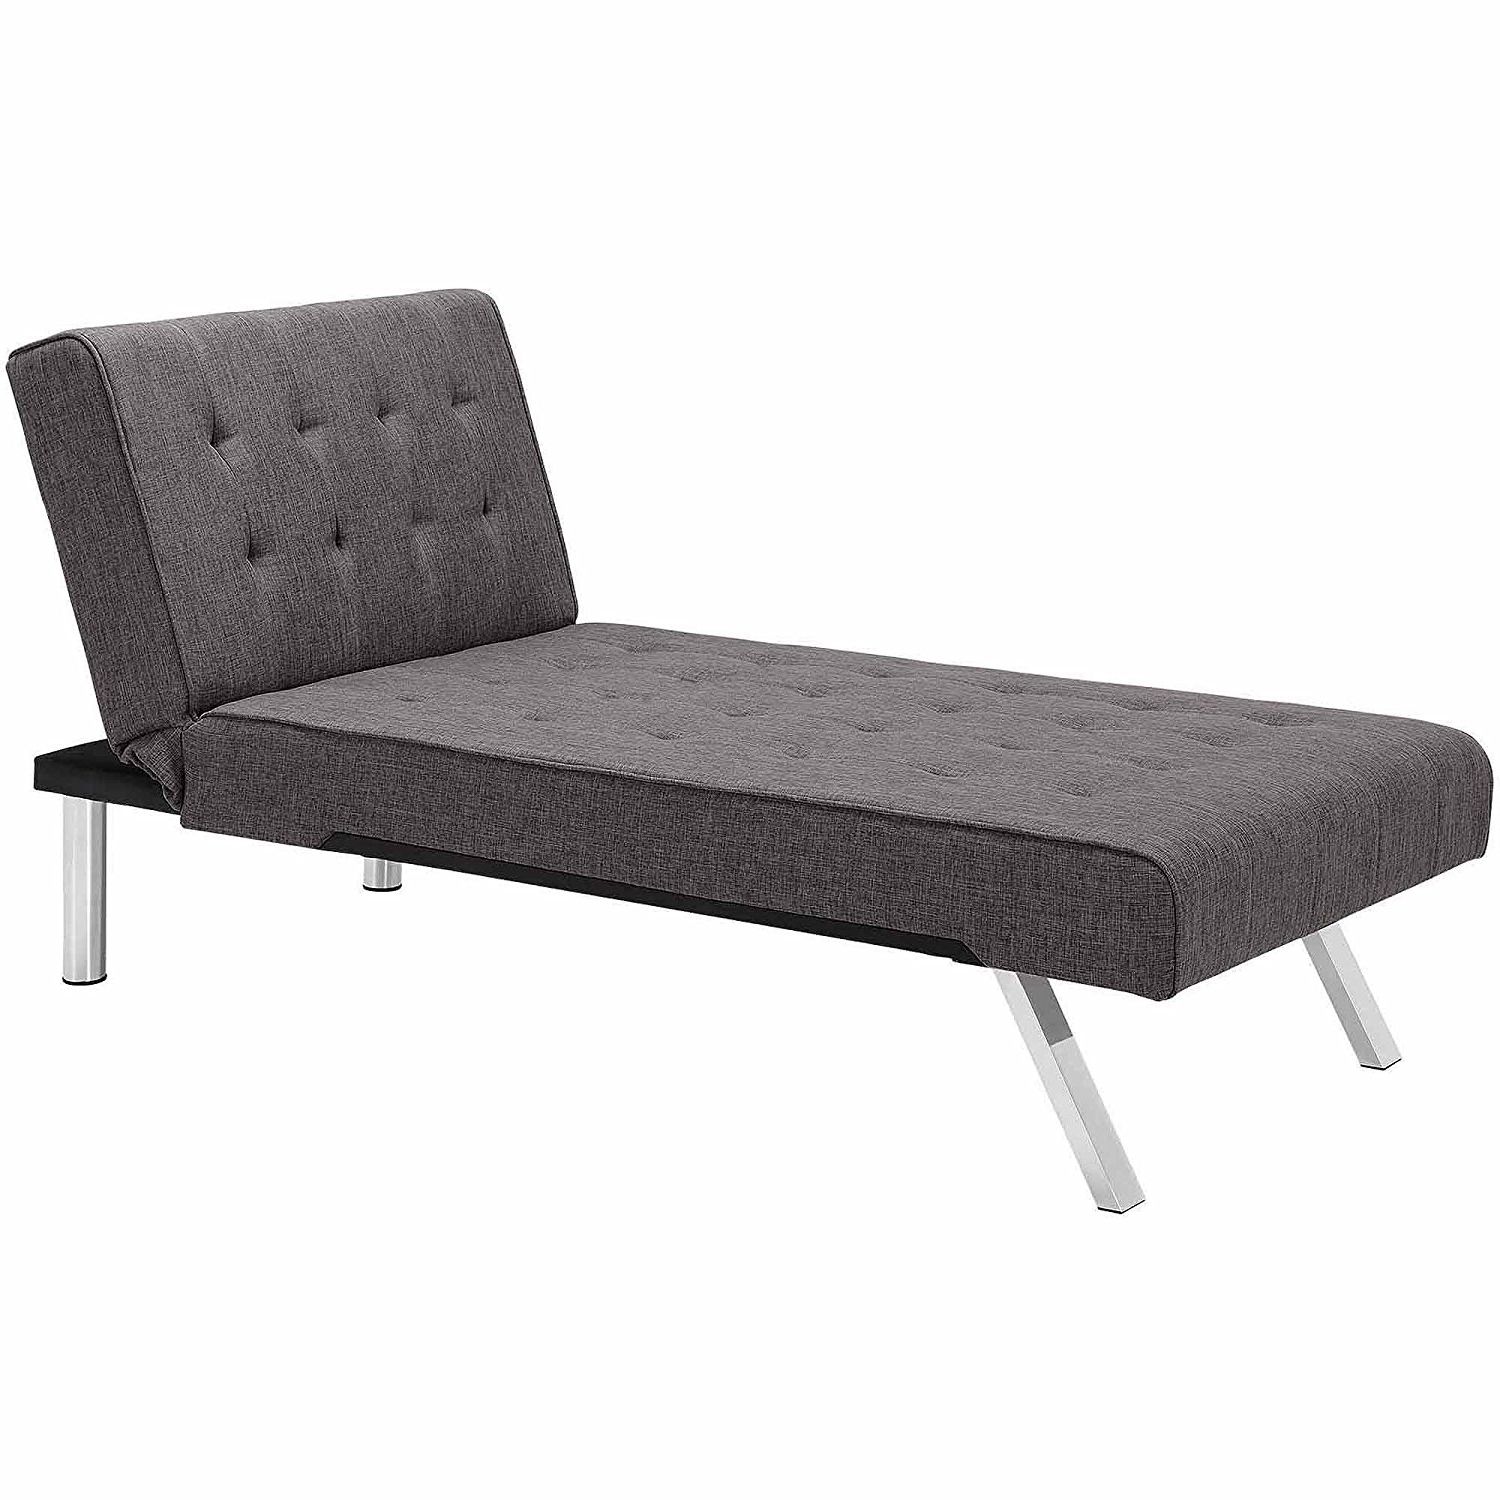 Futons With Chaise Within Most Recently Released Amazon: Emily Futon Chaise Lounger (Gray): Kitchen & Dining (View 12 of 15)